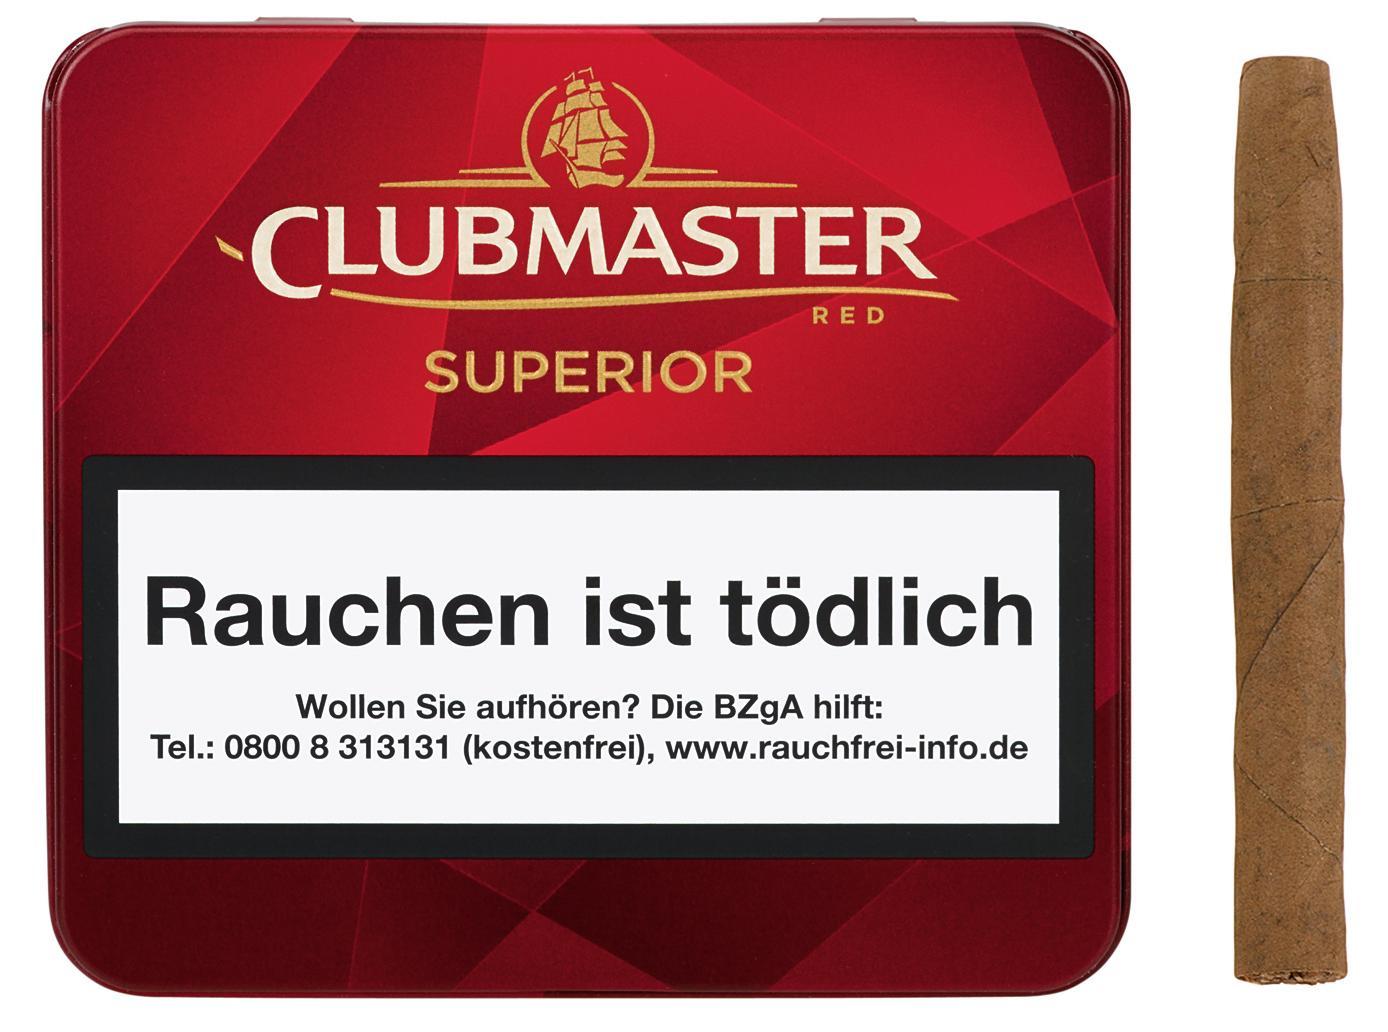 Clubmaster Superior Red ohne Filter Nr. 229 5 x 20 Zigarillos